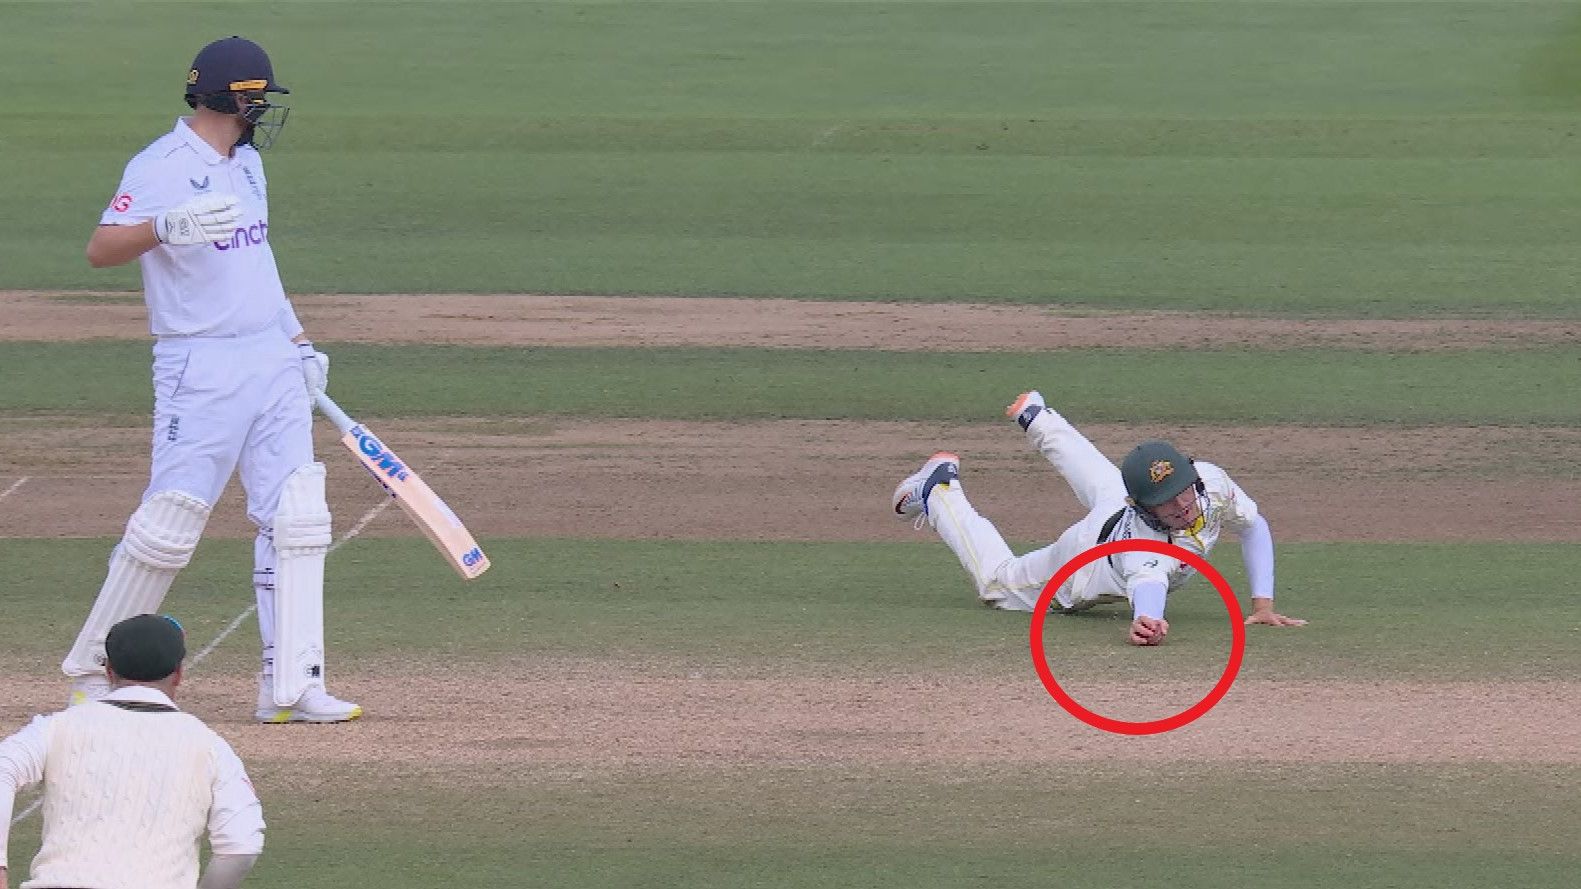 Marnus Labuschagne was booed for claiming a catch against Ollie Robinson.